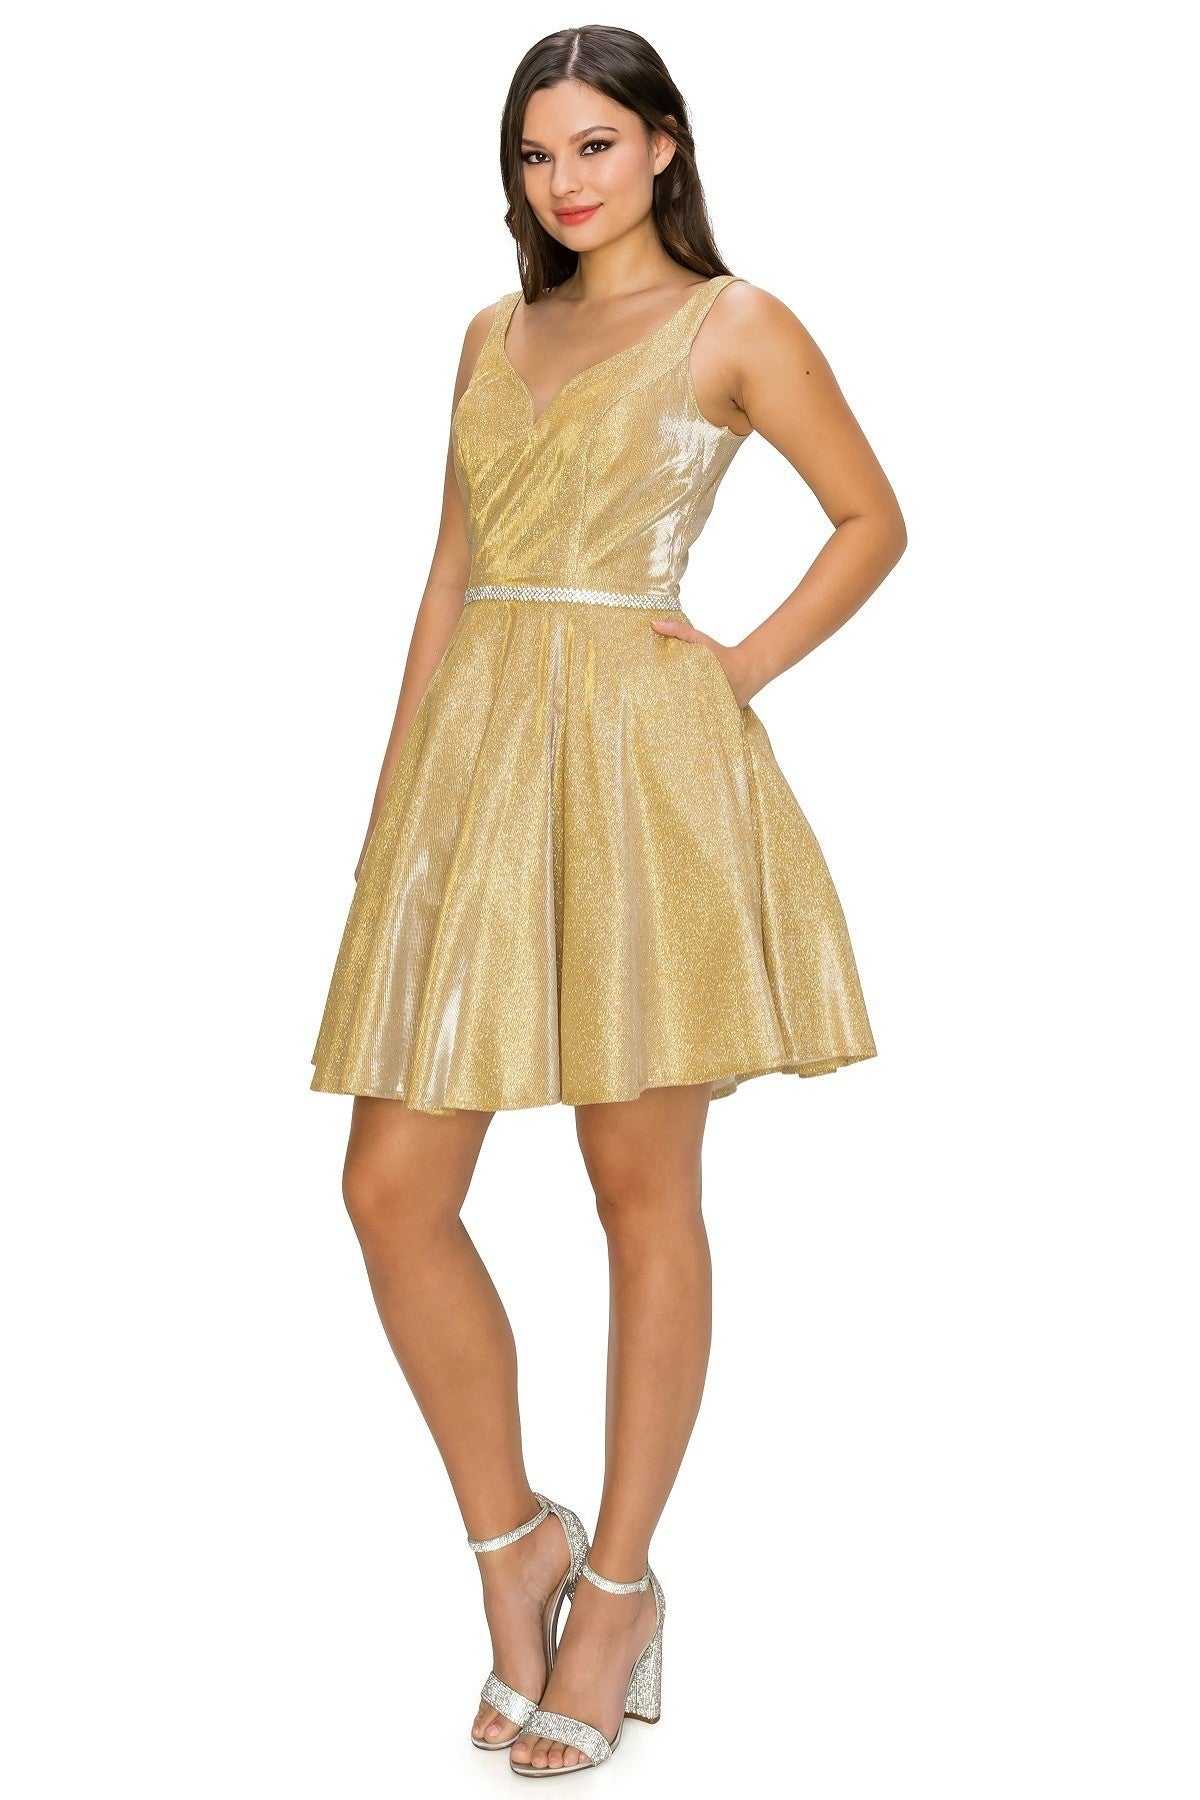 Metalic Party Dress by Cinderella Couture USA AS8013J-GOLD